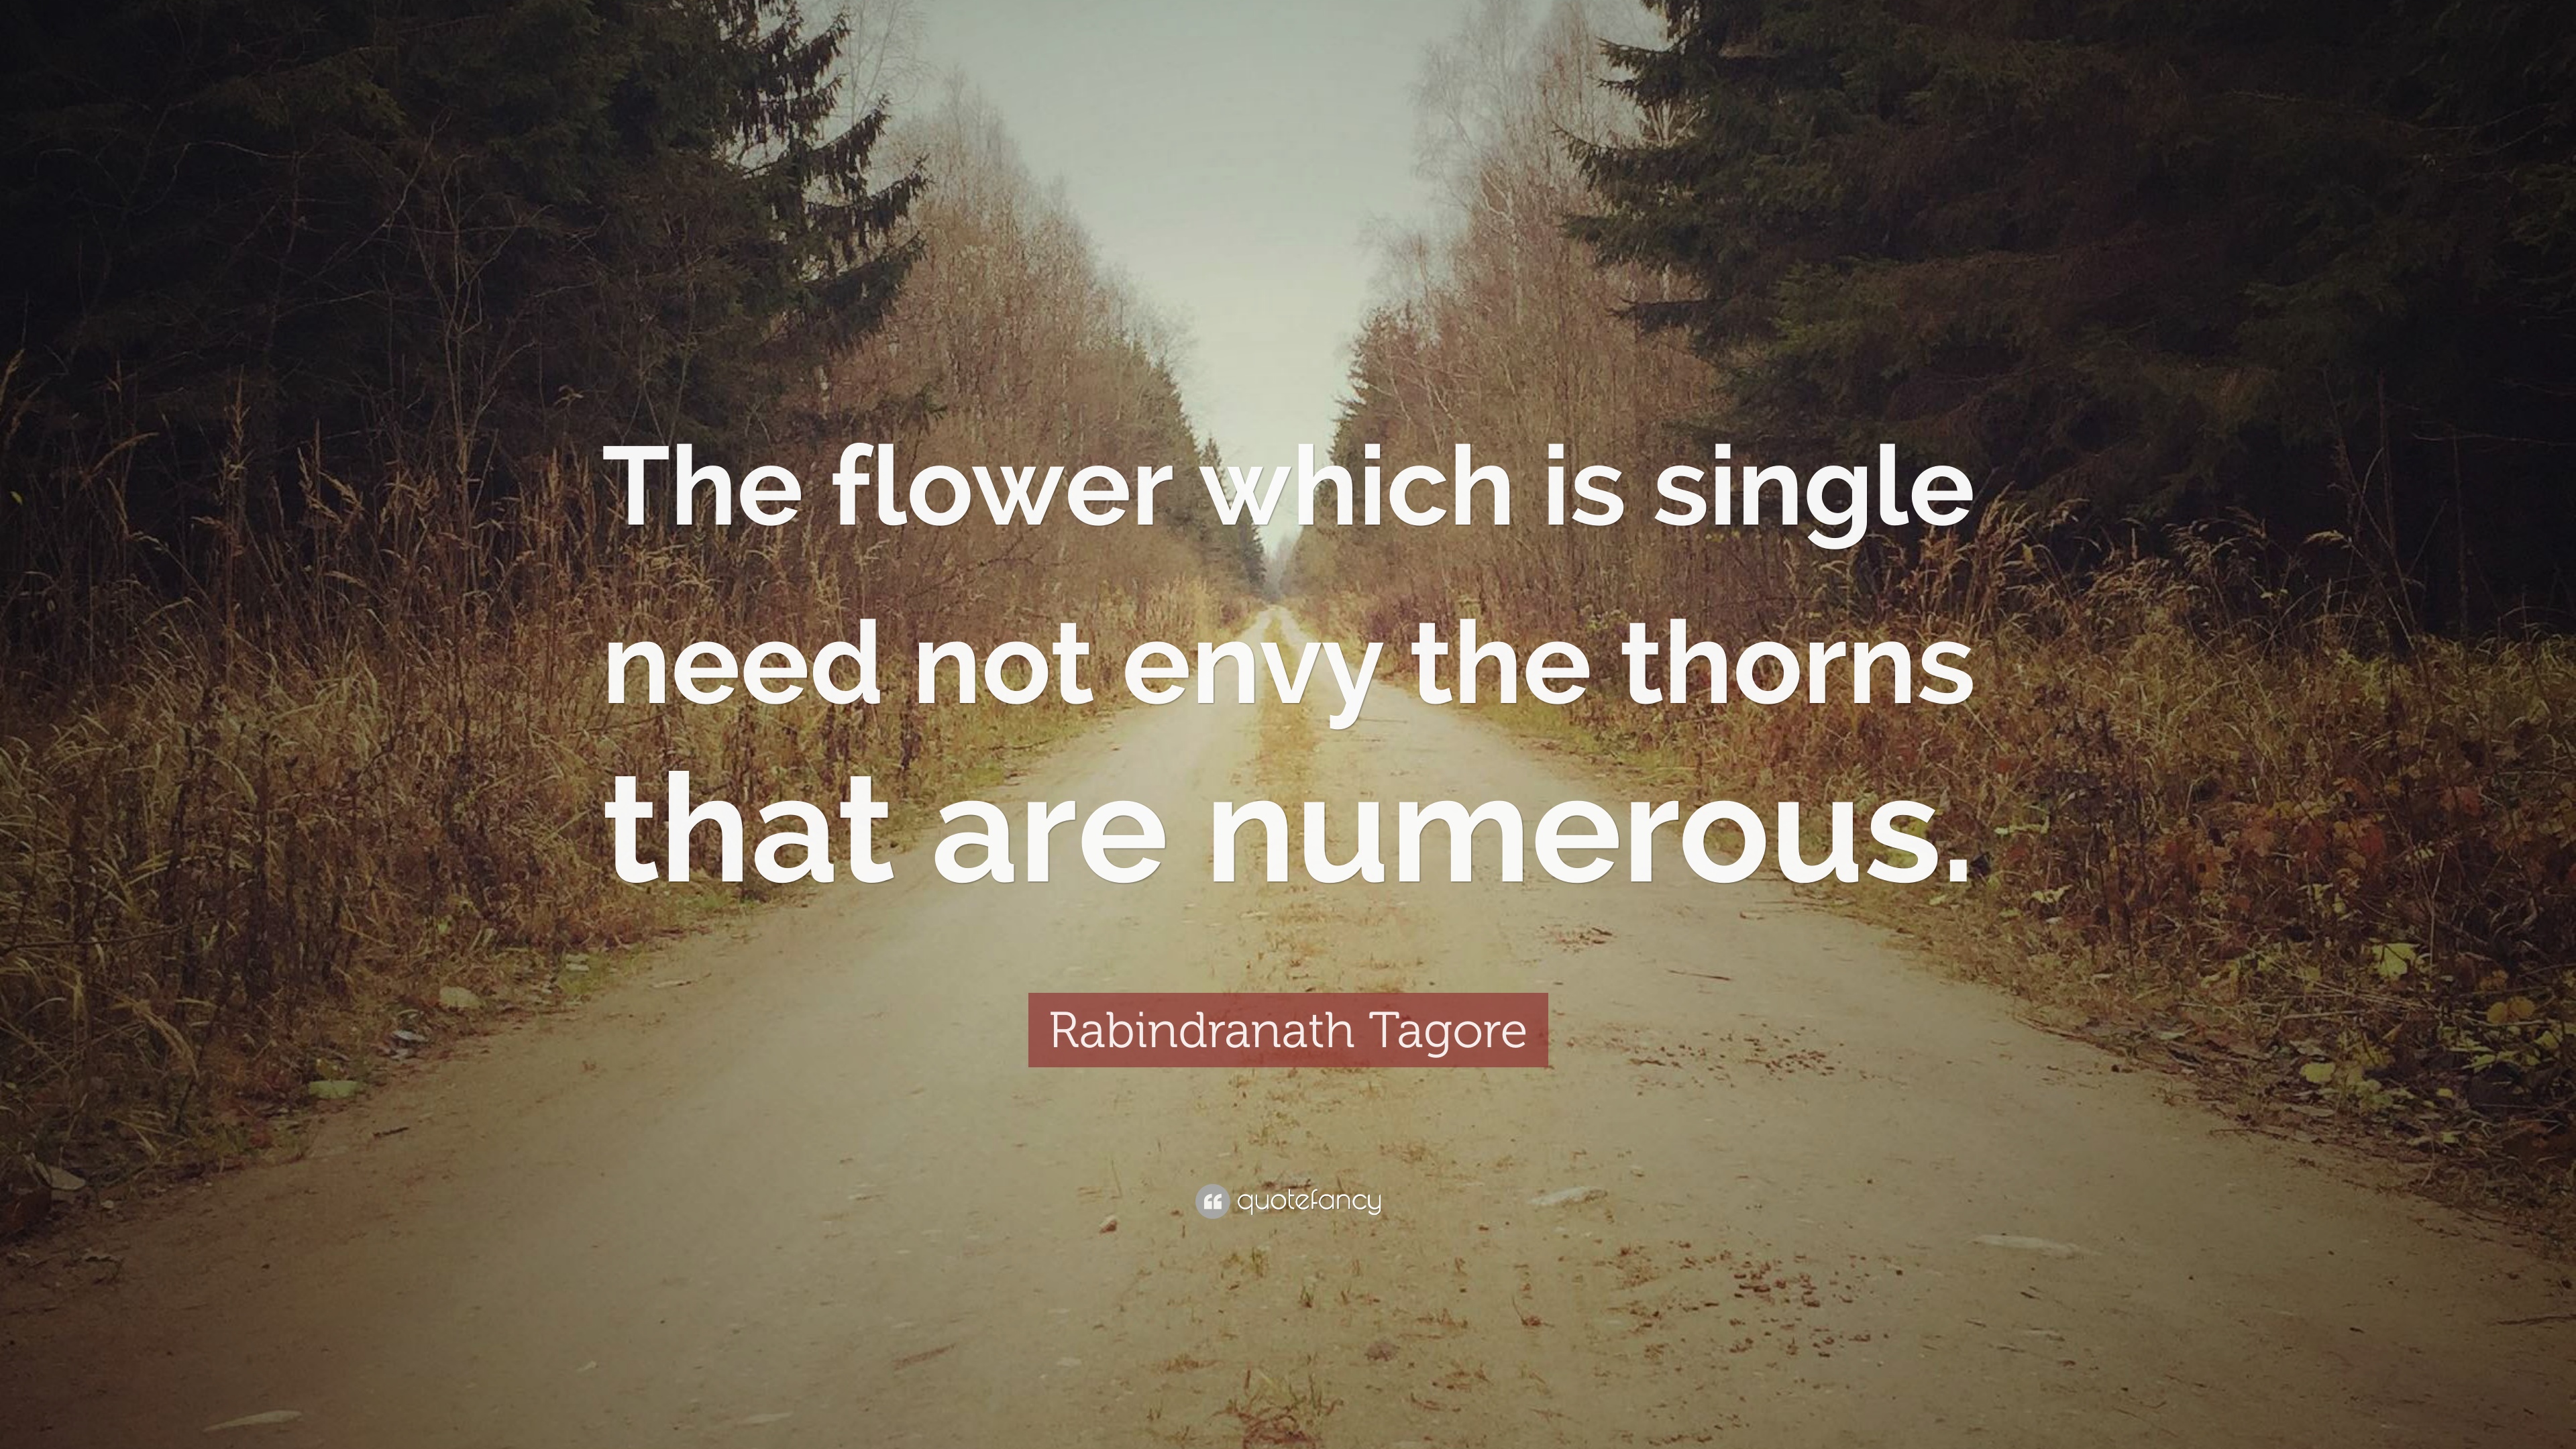 Rabindranath Tagore Quote: “The flower which is single need